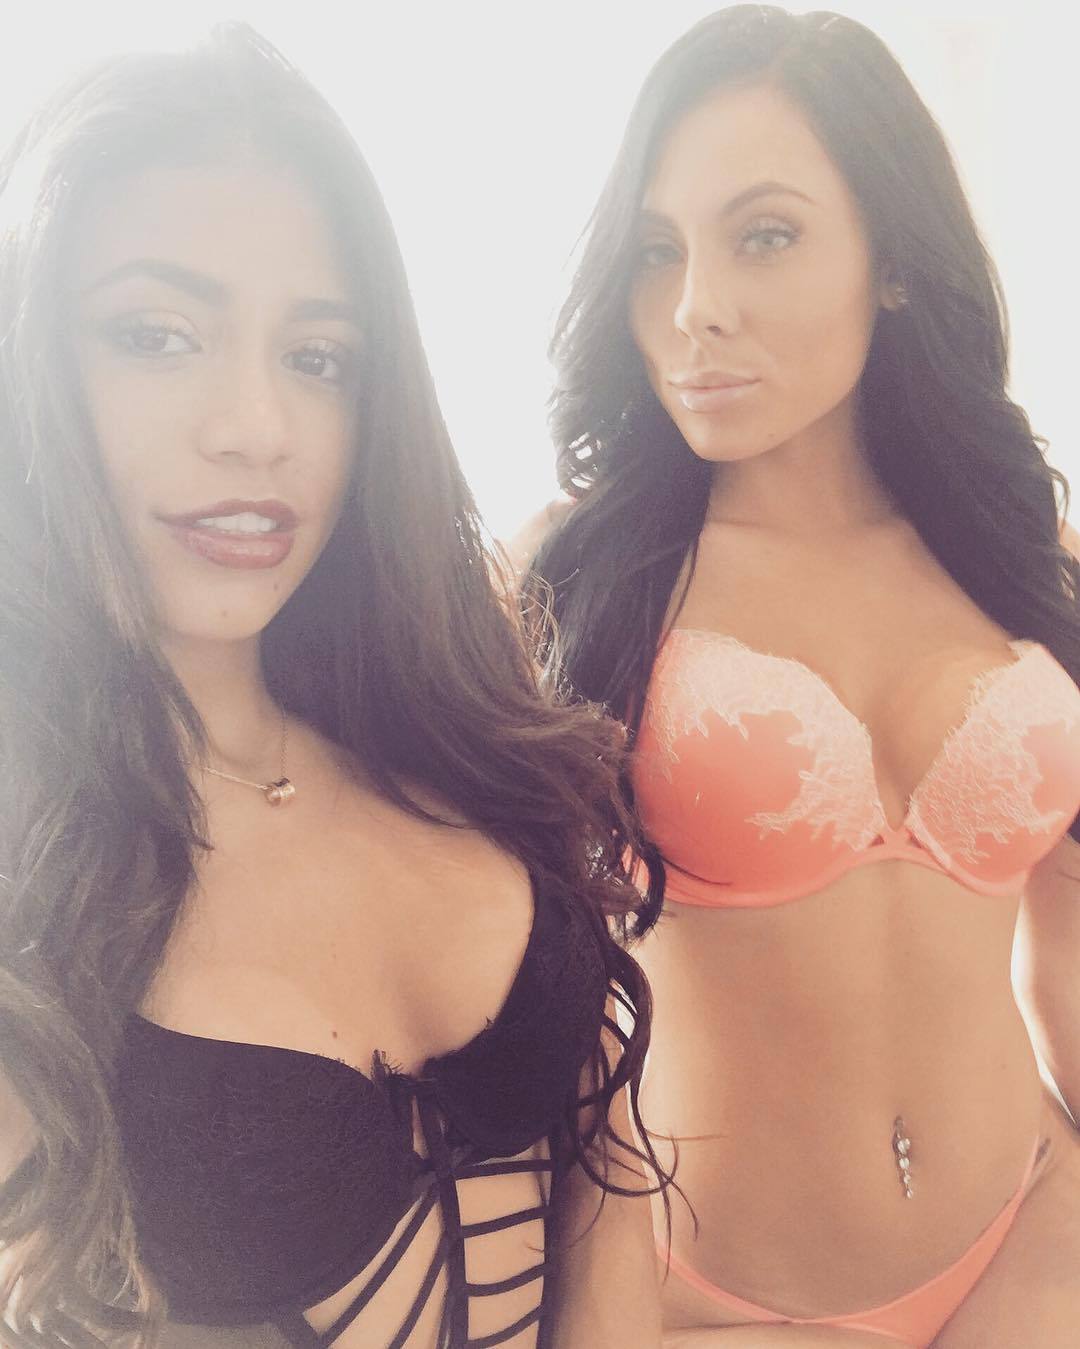 Watch us now on our private uncensored ❌❌❌ #snapchat where me and my girls